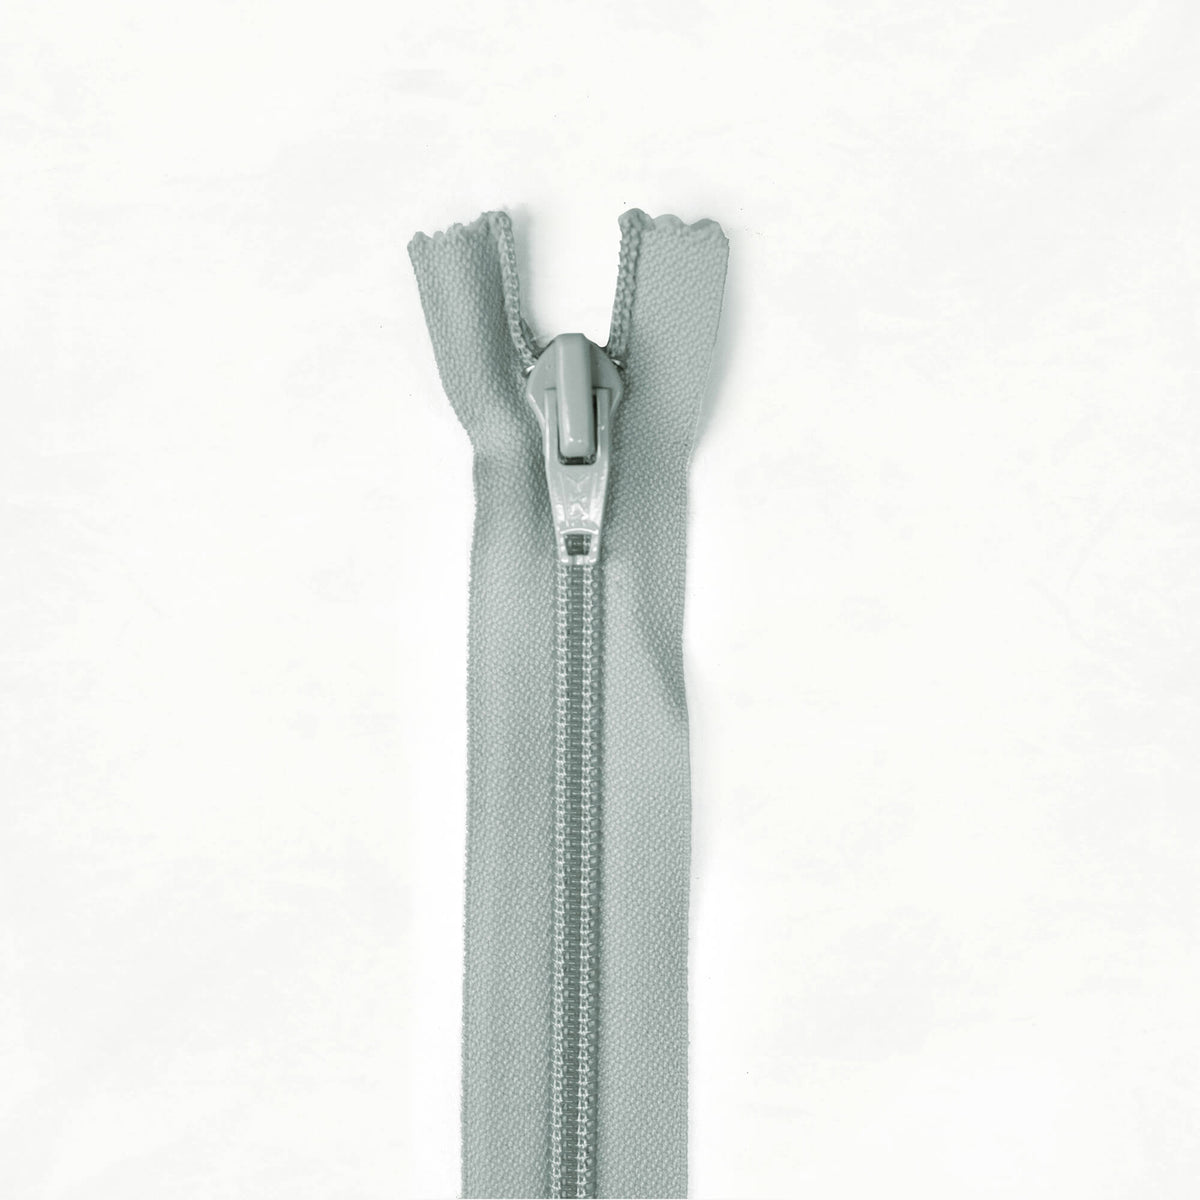 8" Coil Zippers - Gray (Deadstock)